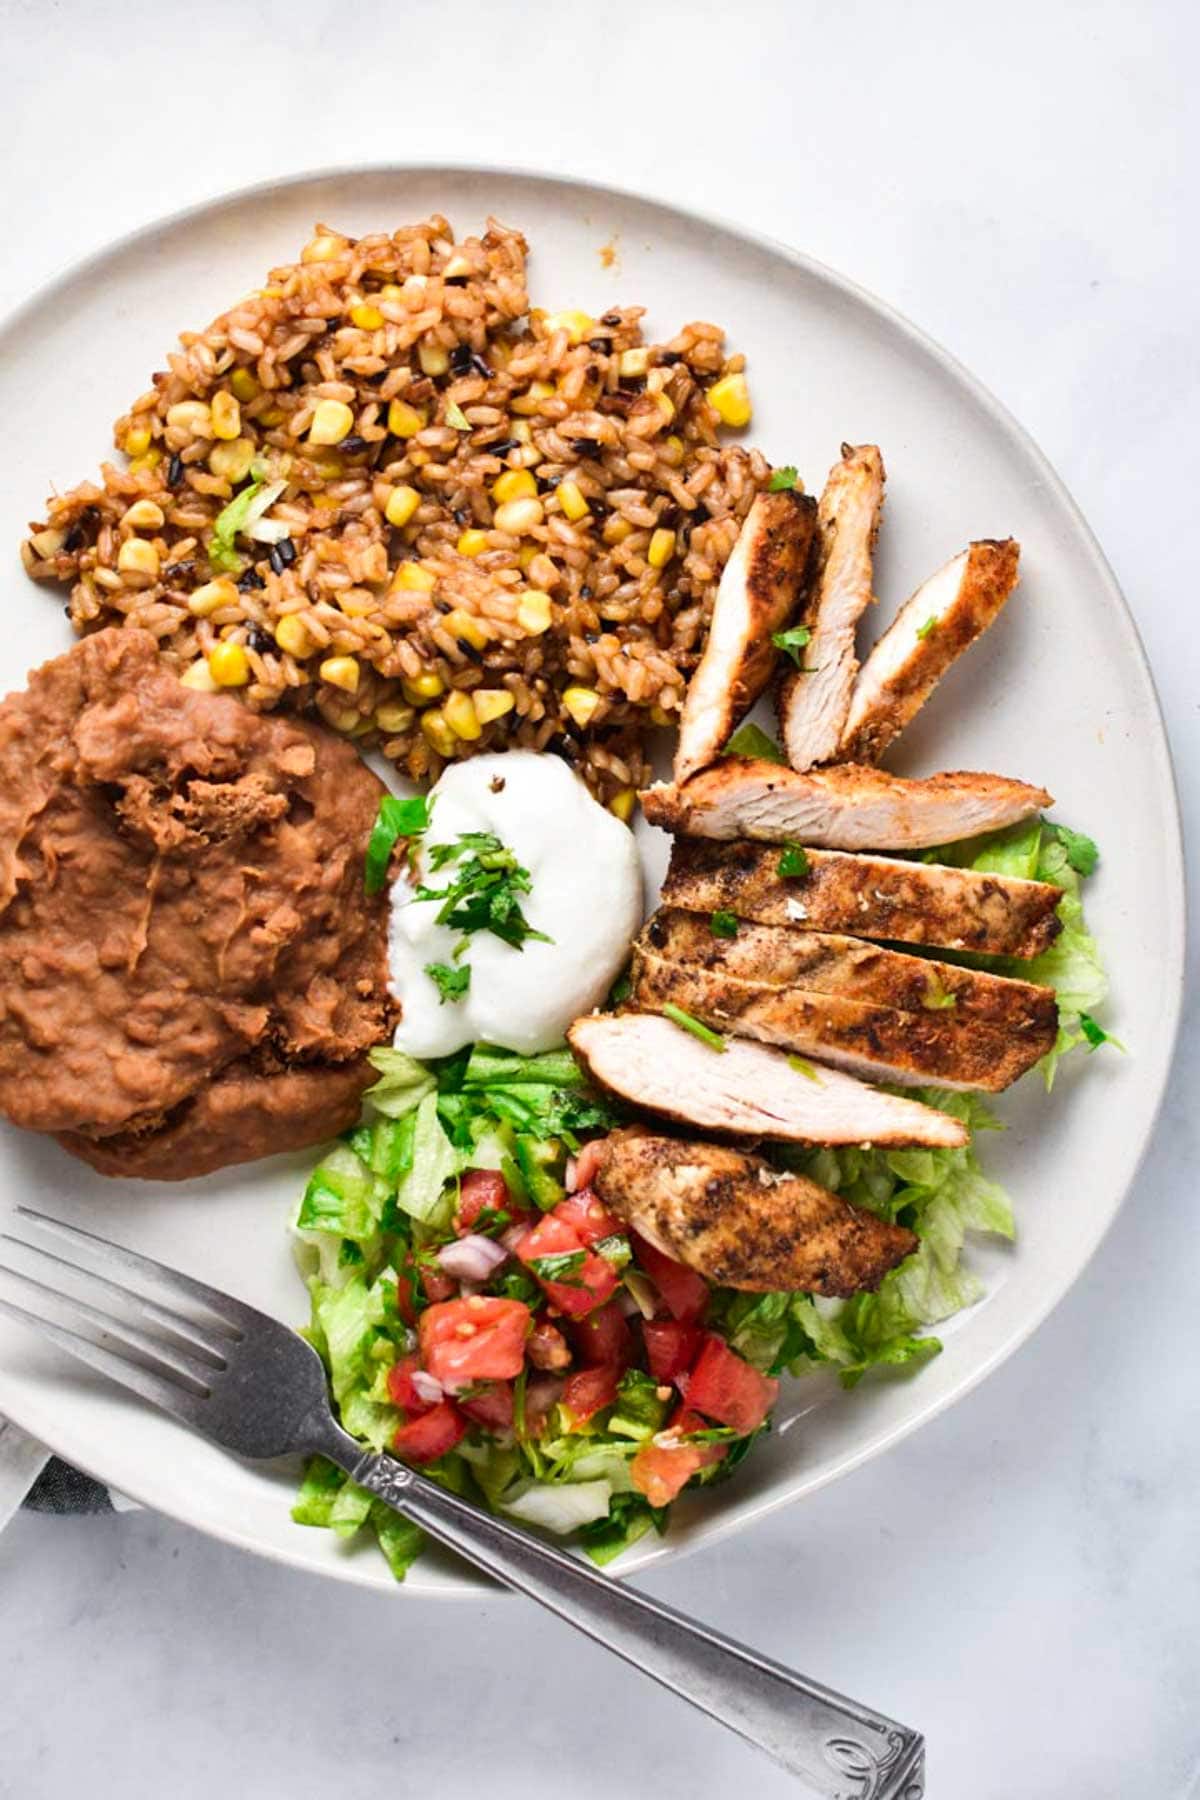 Sliced grilled chicken next to refried beans and Mexican rice.